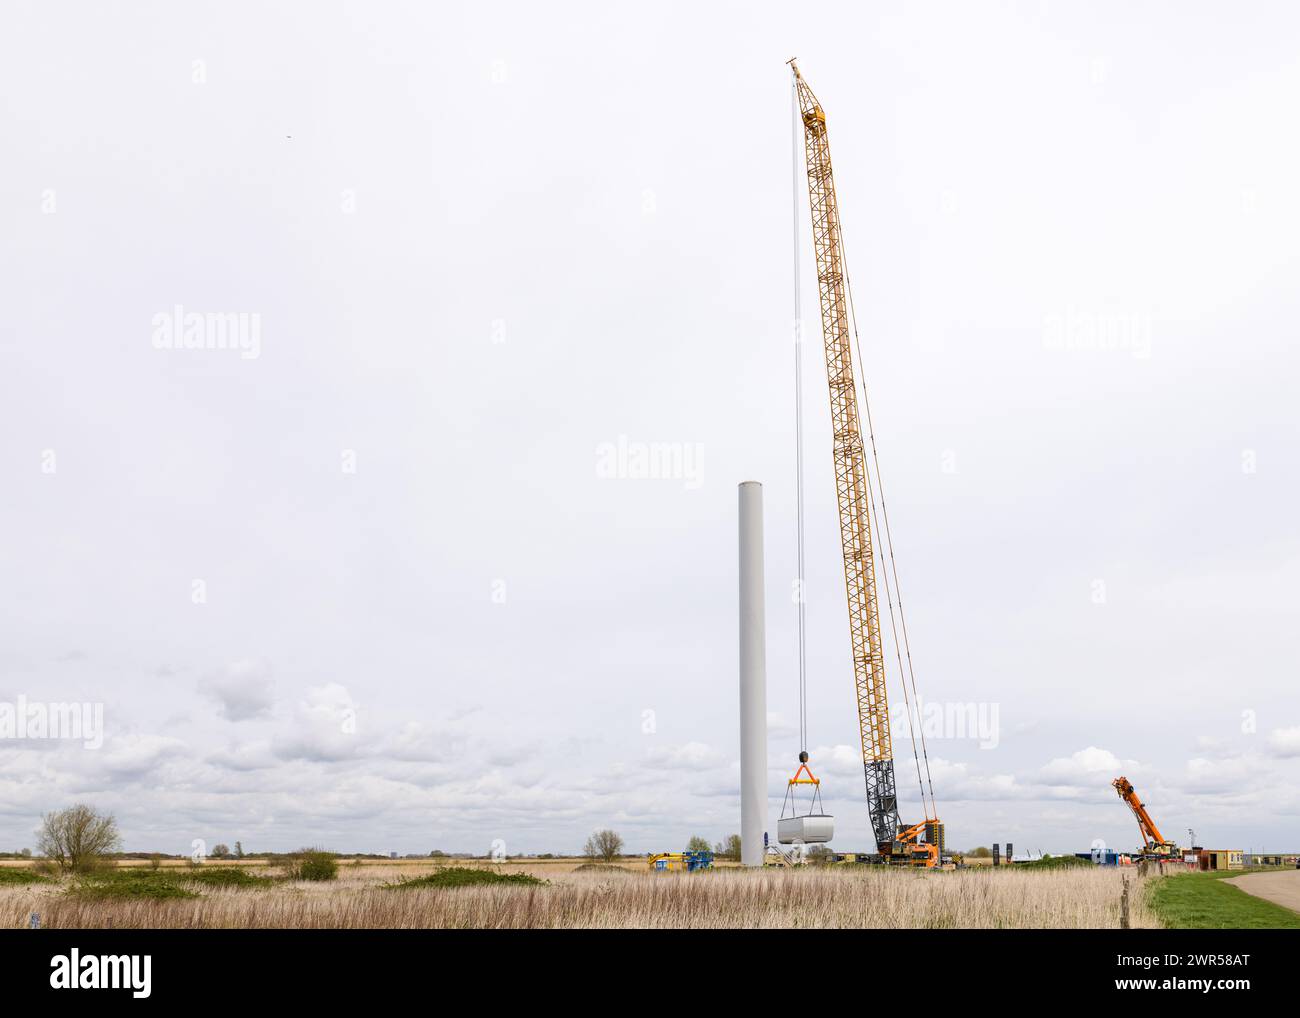 MELISSANT, GOEREE-OVERFLAKKEE, THE NETHERLANDS - APRIL 8, 2022: The construction of a wind turbine at the newly developed windpark Kroningswind near M Stock Photo